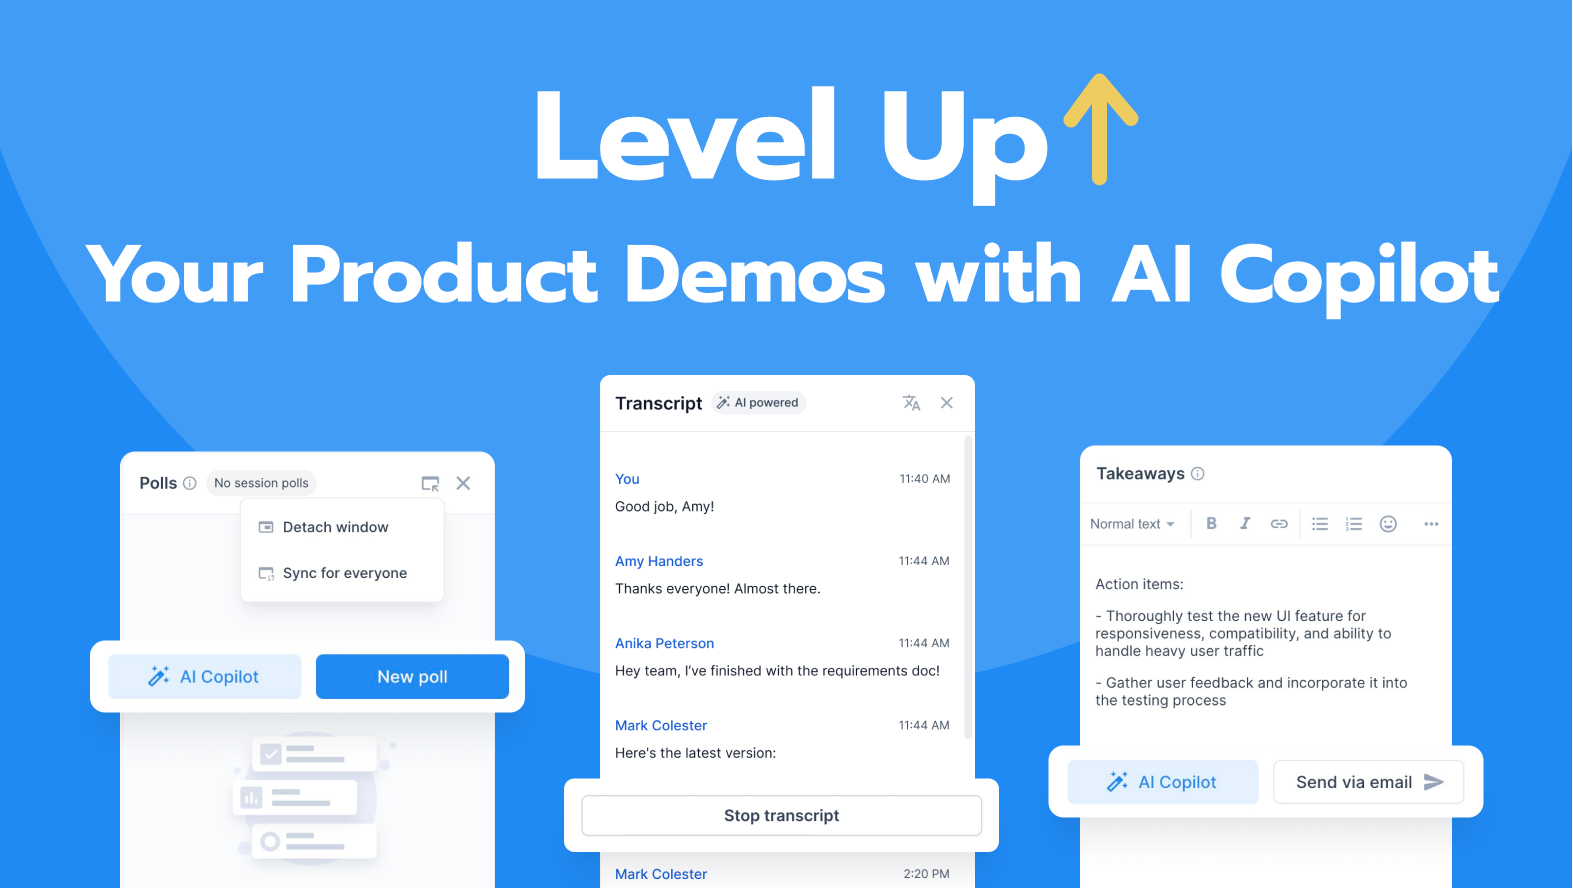 level up your product demos with AI Copilot